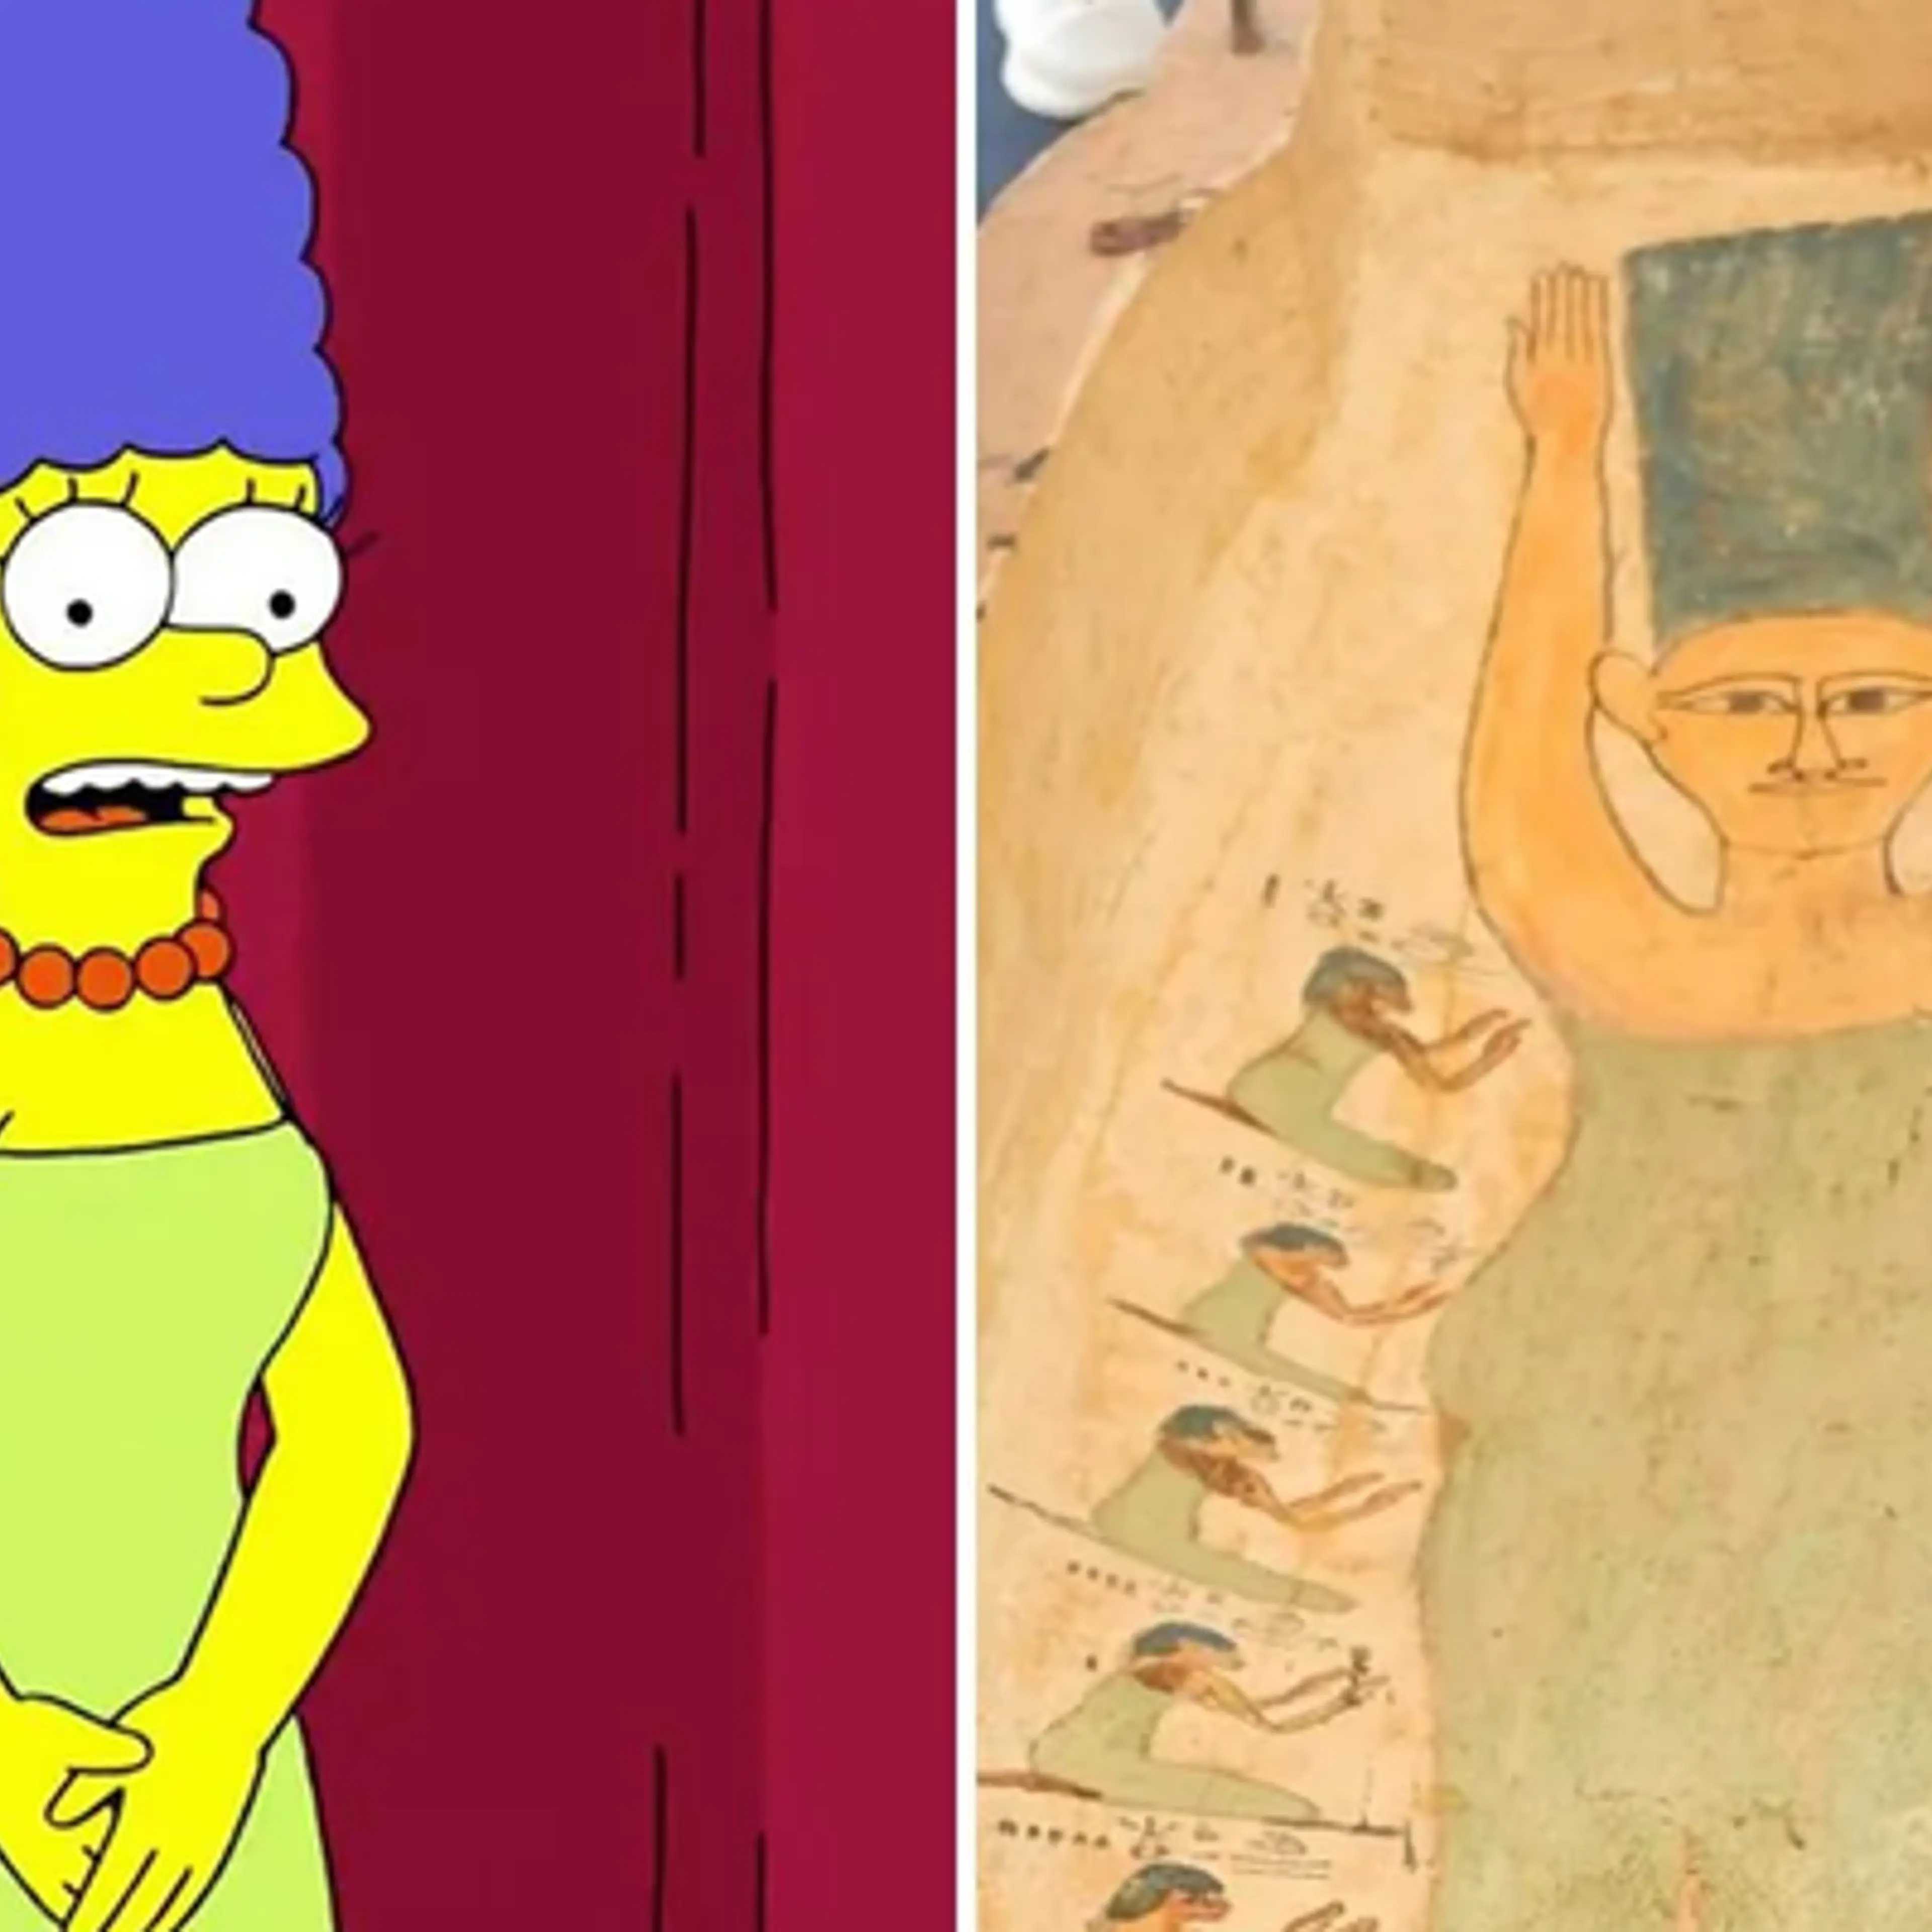 D’oh! Ancient Egyptians Predicted Marge Simpson 3,500 Years Ago! Or Did They?